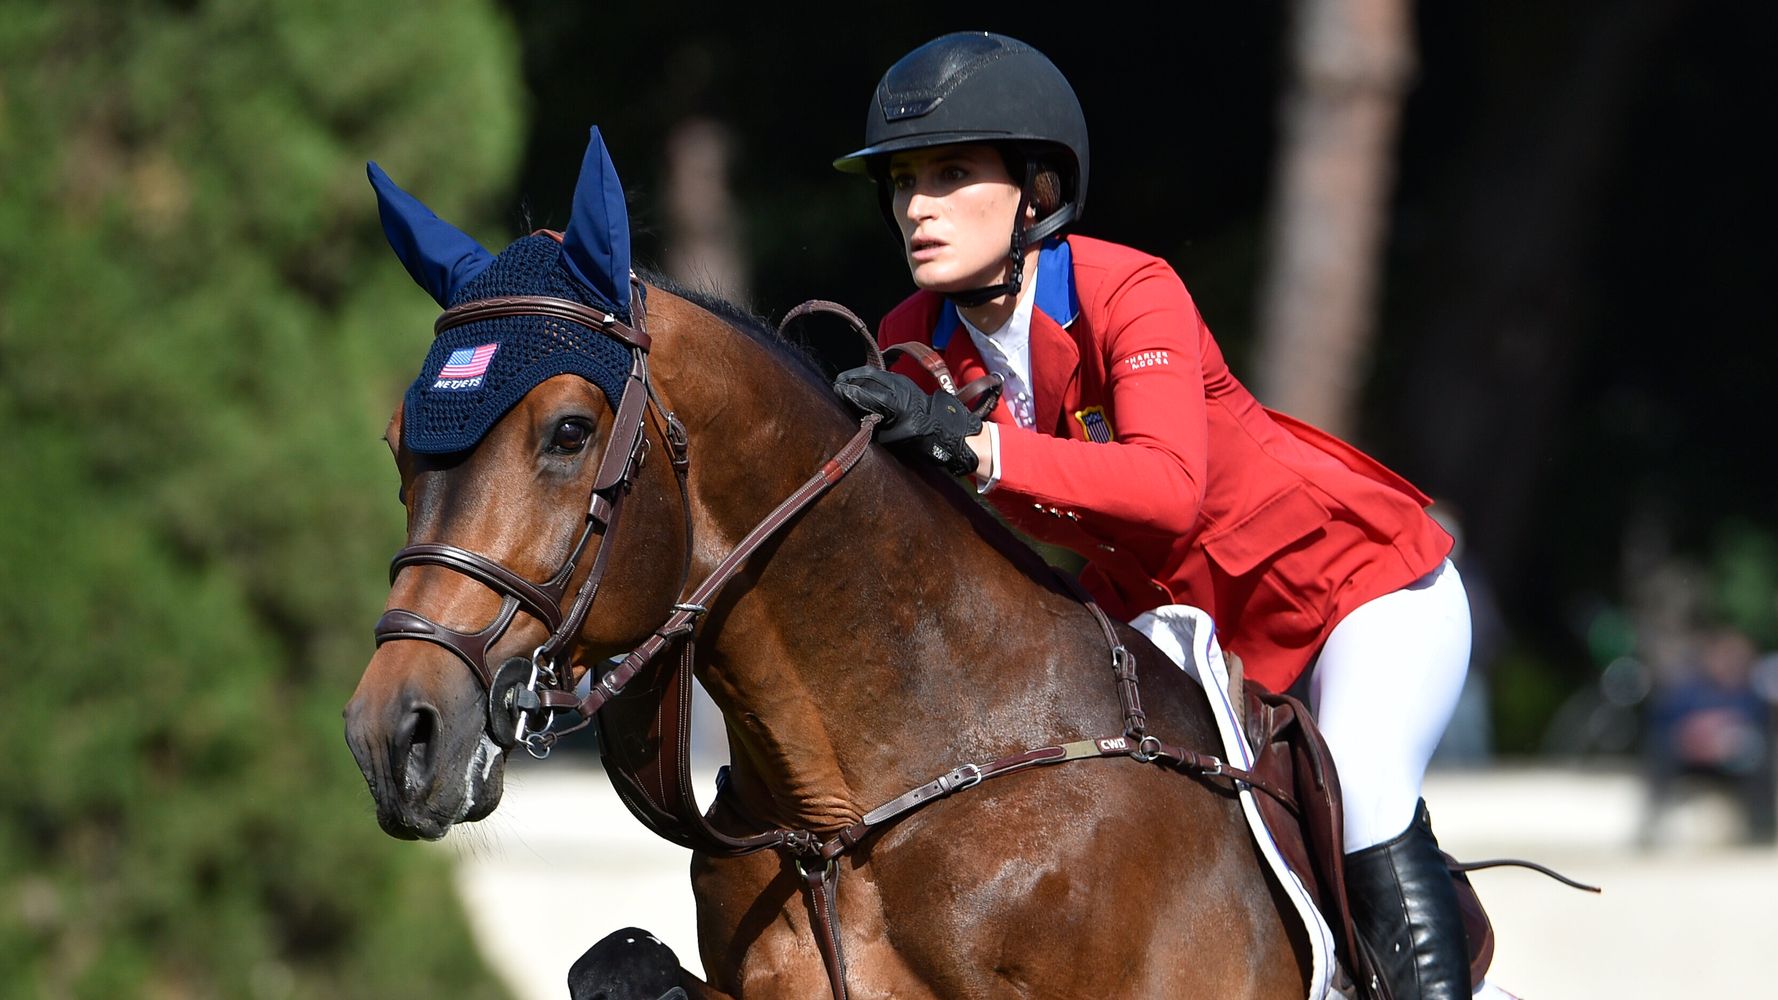 Jessica Springsteen, Daughter Of Rock Icon Bruce Springsteen, Jumps Onto Olympic Team